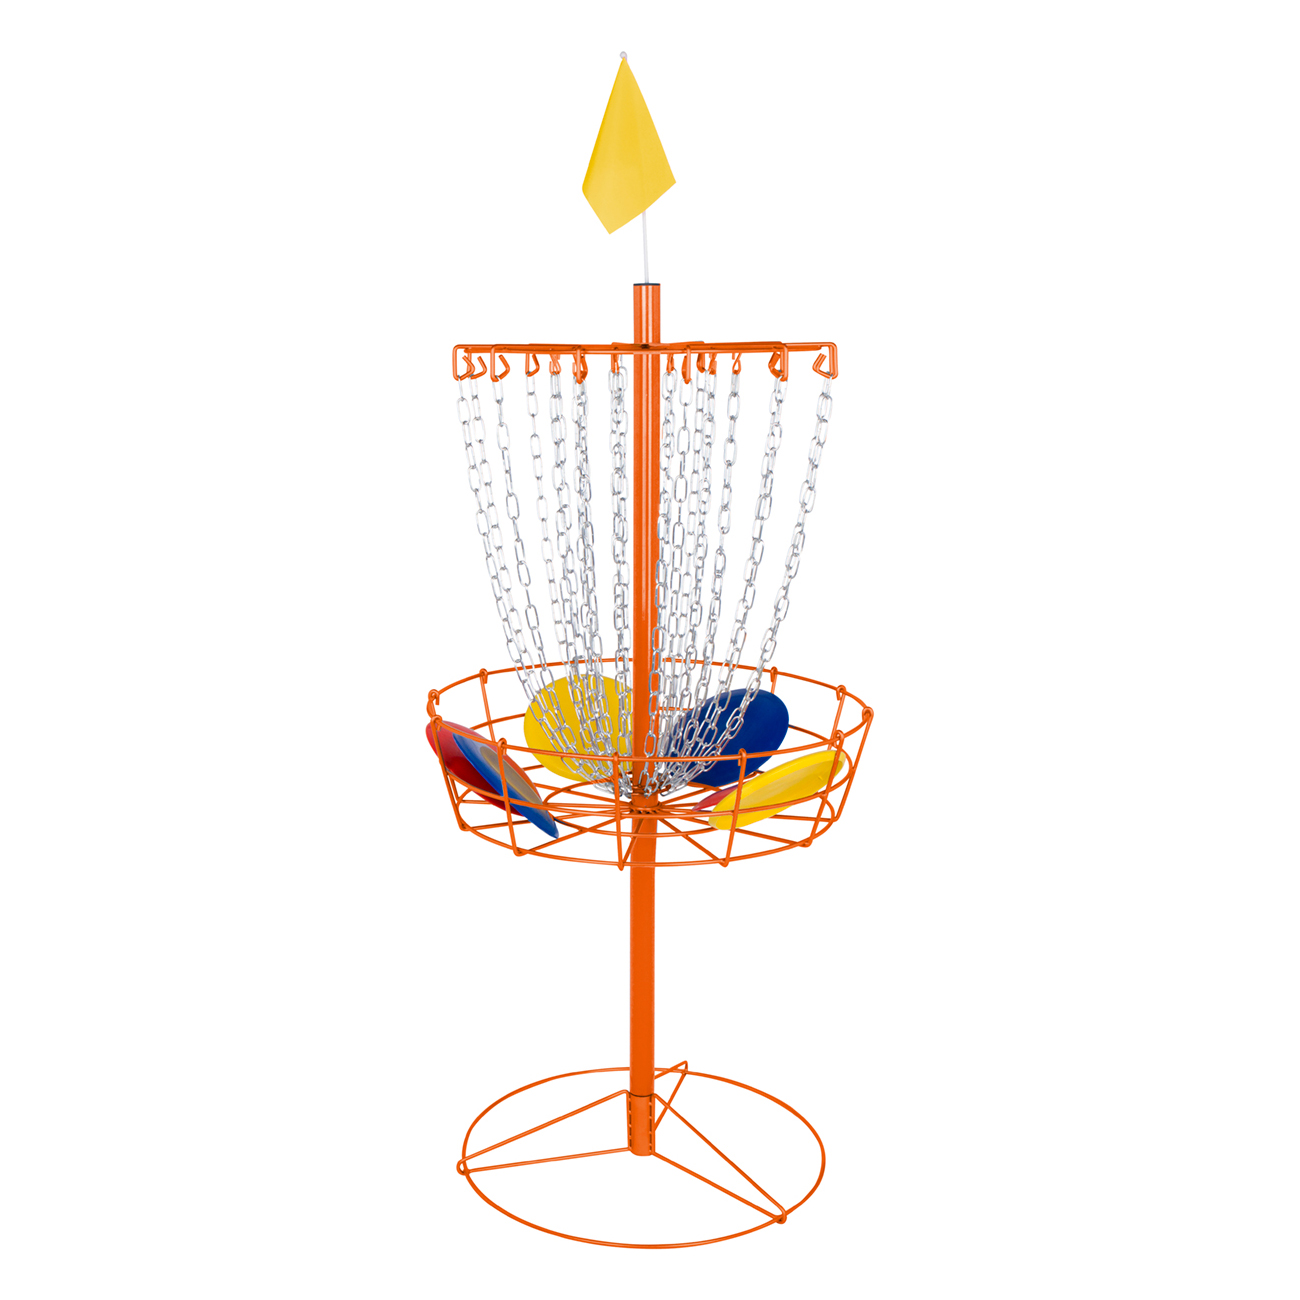 Trademark Innovations Portable Disc Golf Target, Metal Disc Frisbee Golf Goal Set Comes with 6 Discs - image 1 of 1